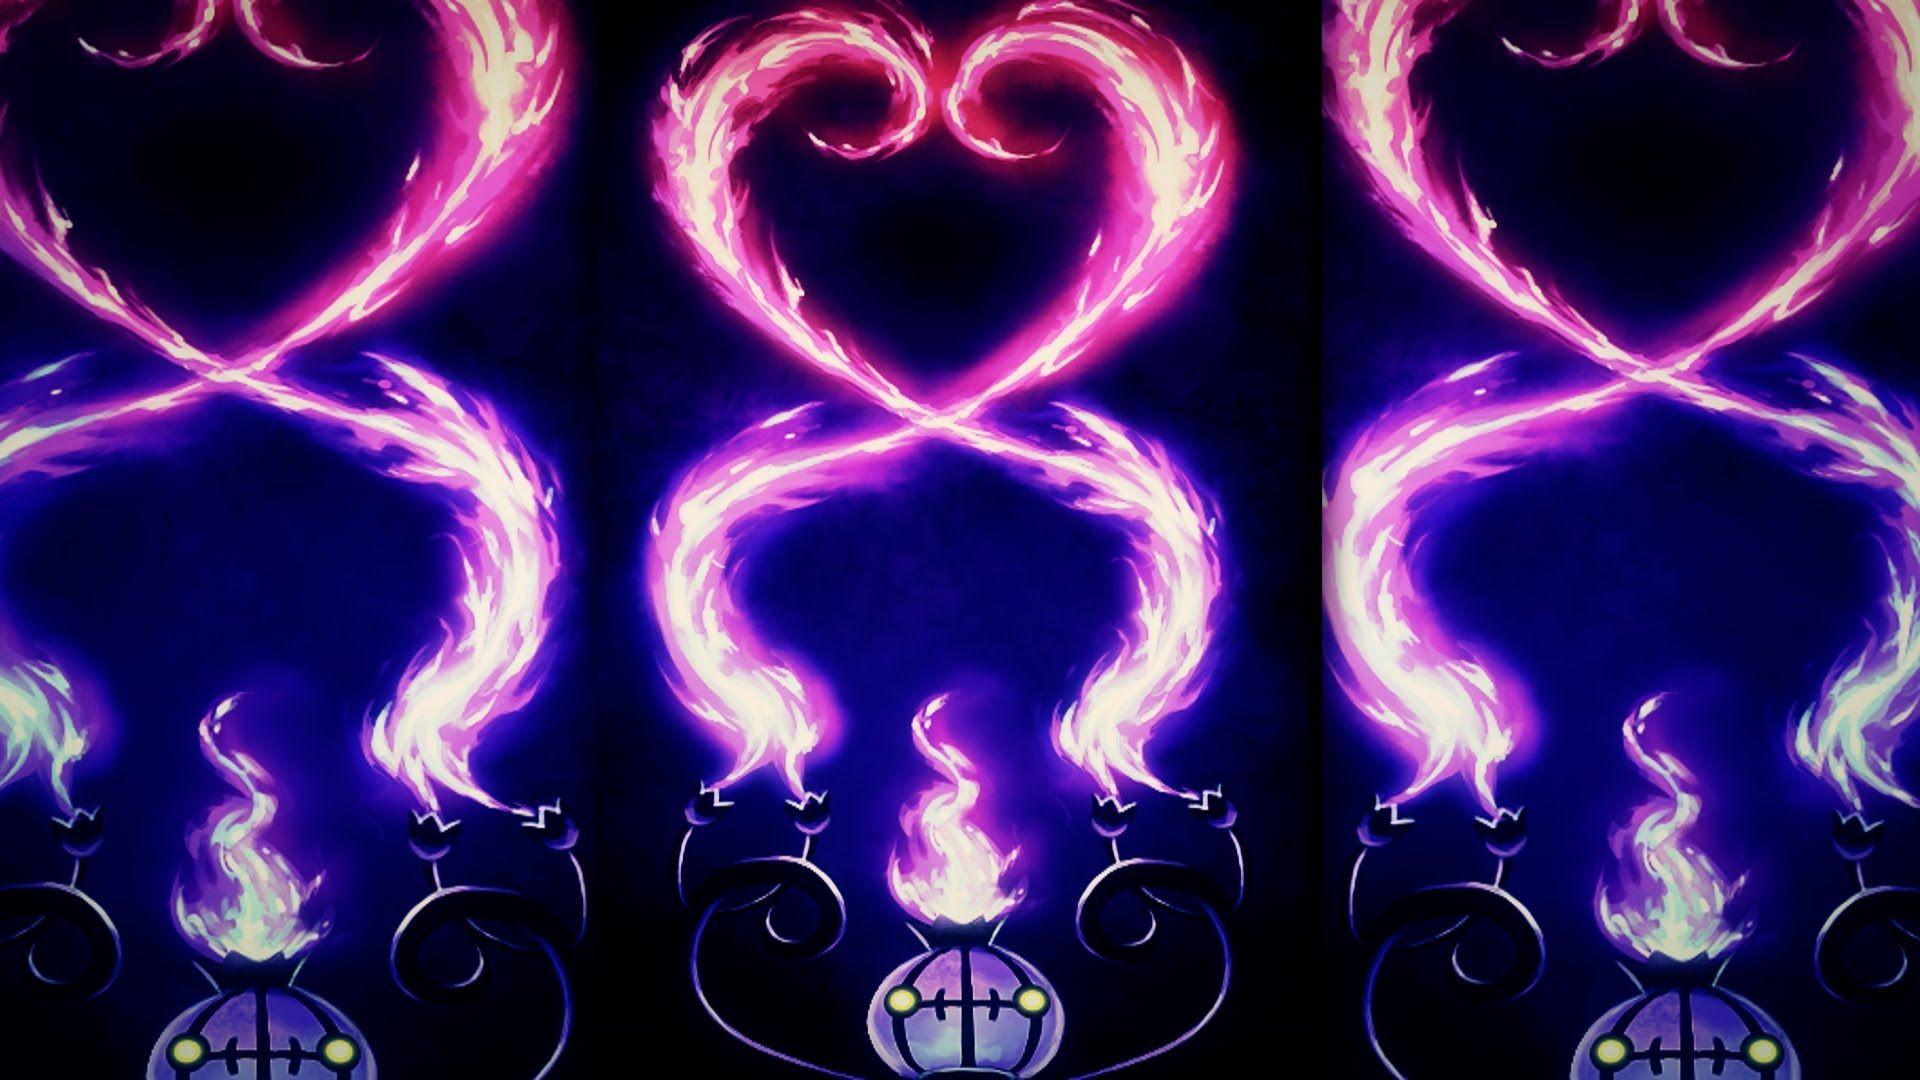 Swing from the Chandelure Pokémon.